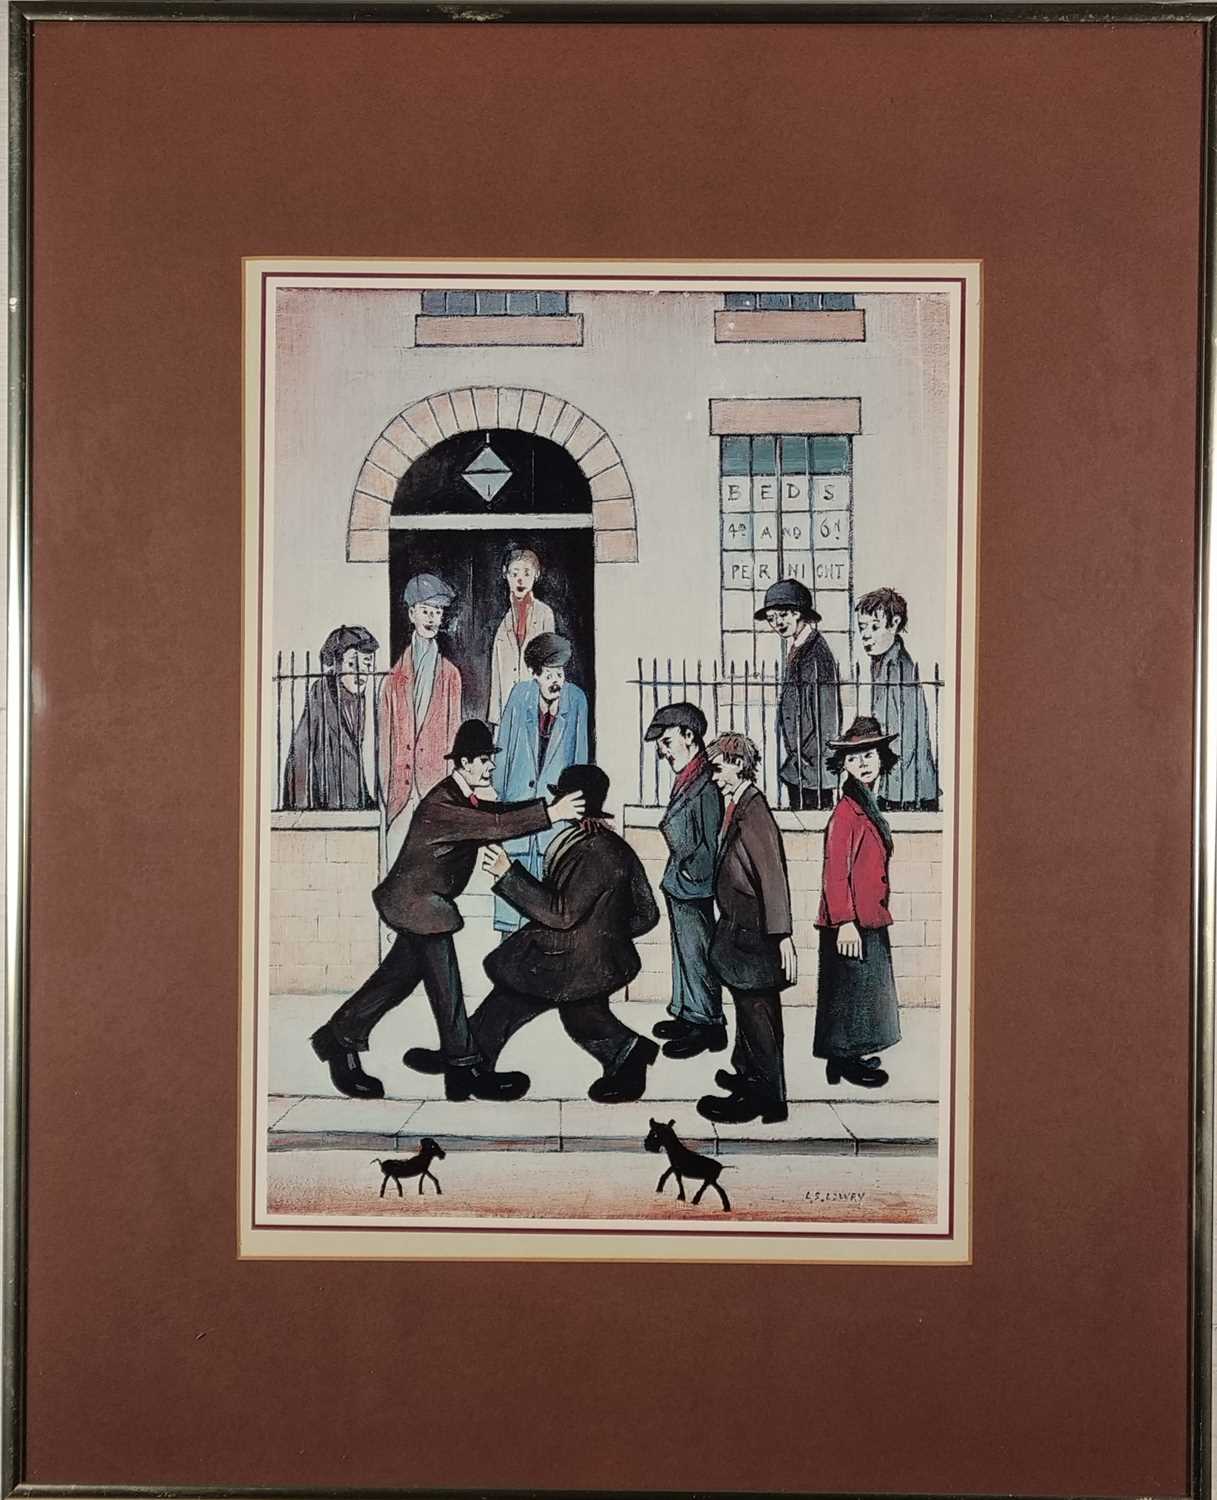 ƚ Laurence Stephen LOWRY (British 1887-1976) A Fight, Salford, Giclée print, titled on label - Image 8 of 12